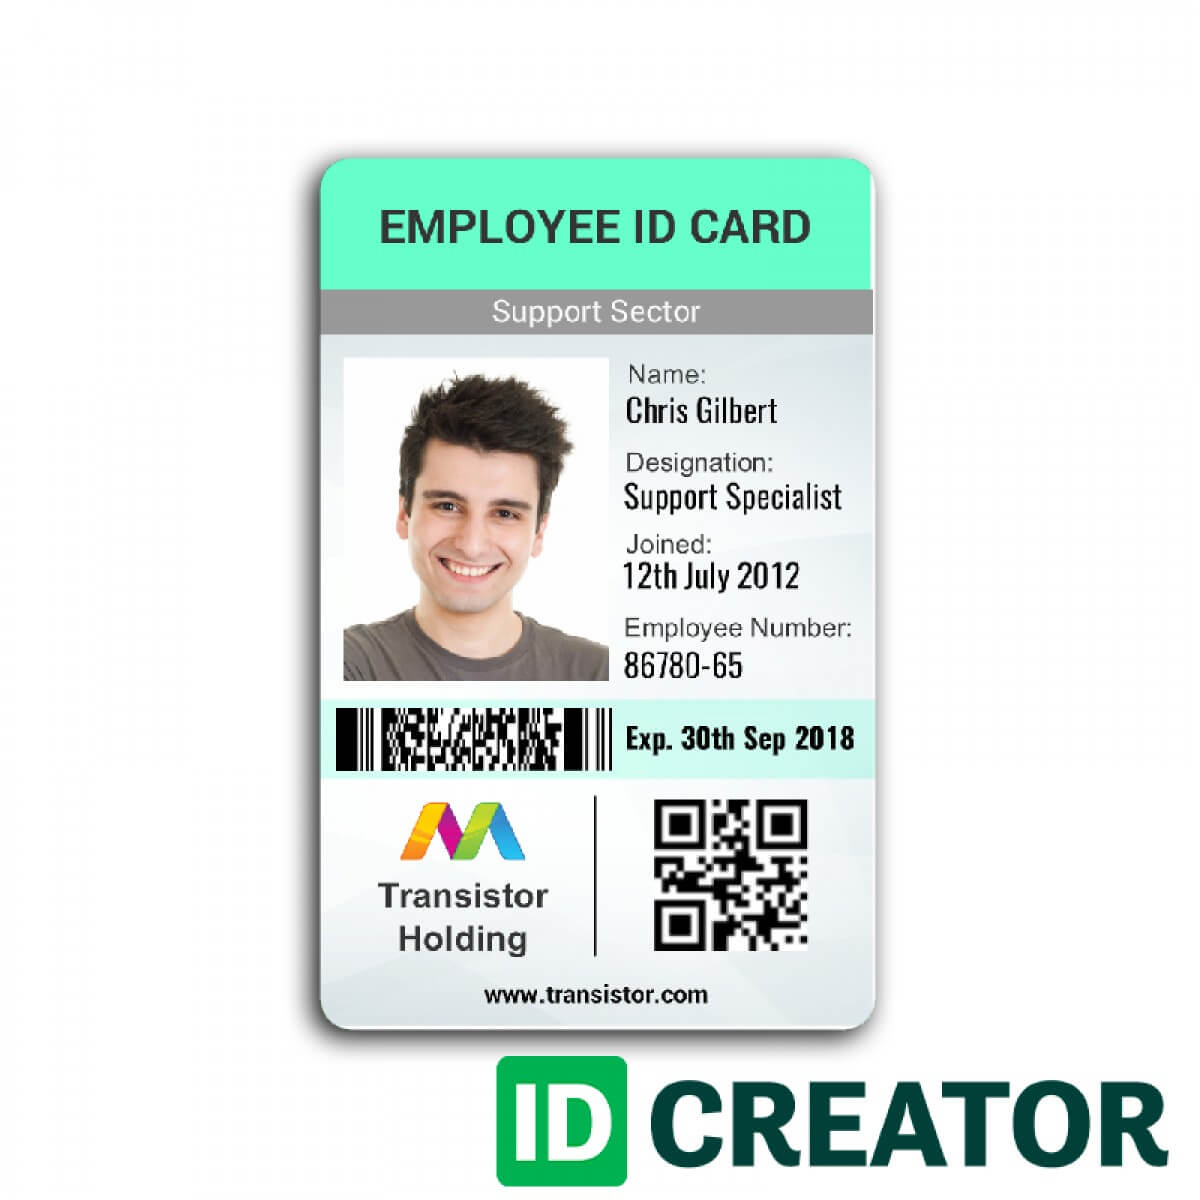 006 Employee Badge Template Vertical Id Card Ships Same Day With Regard To Id Card Template Word Free